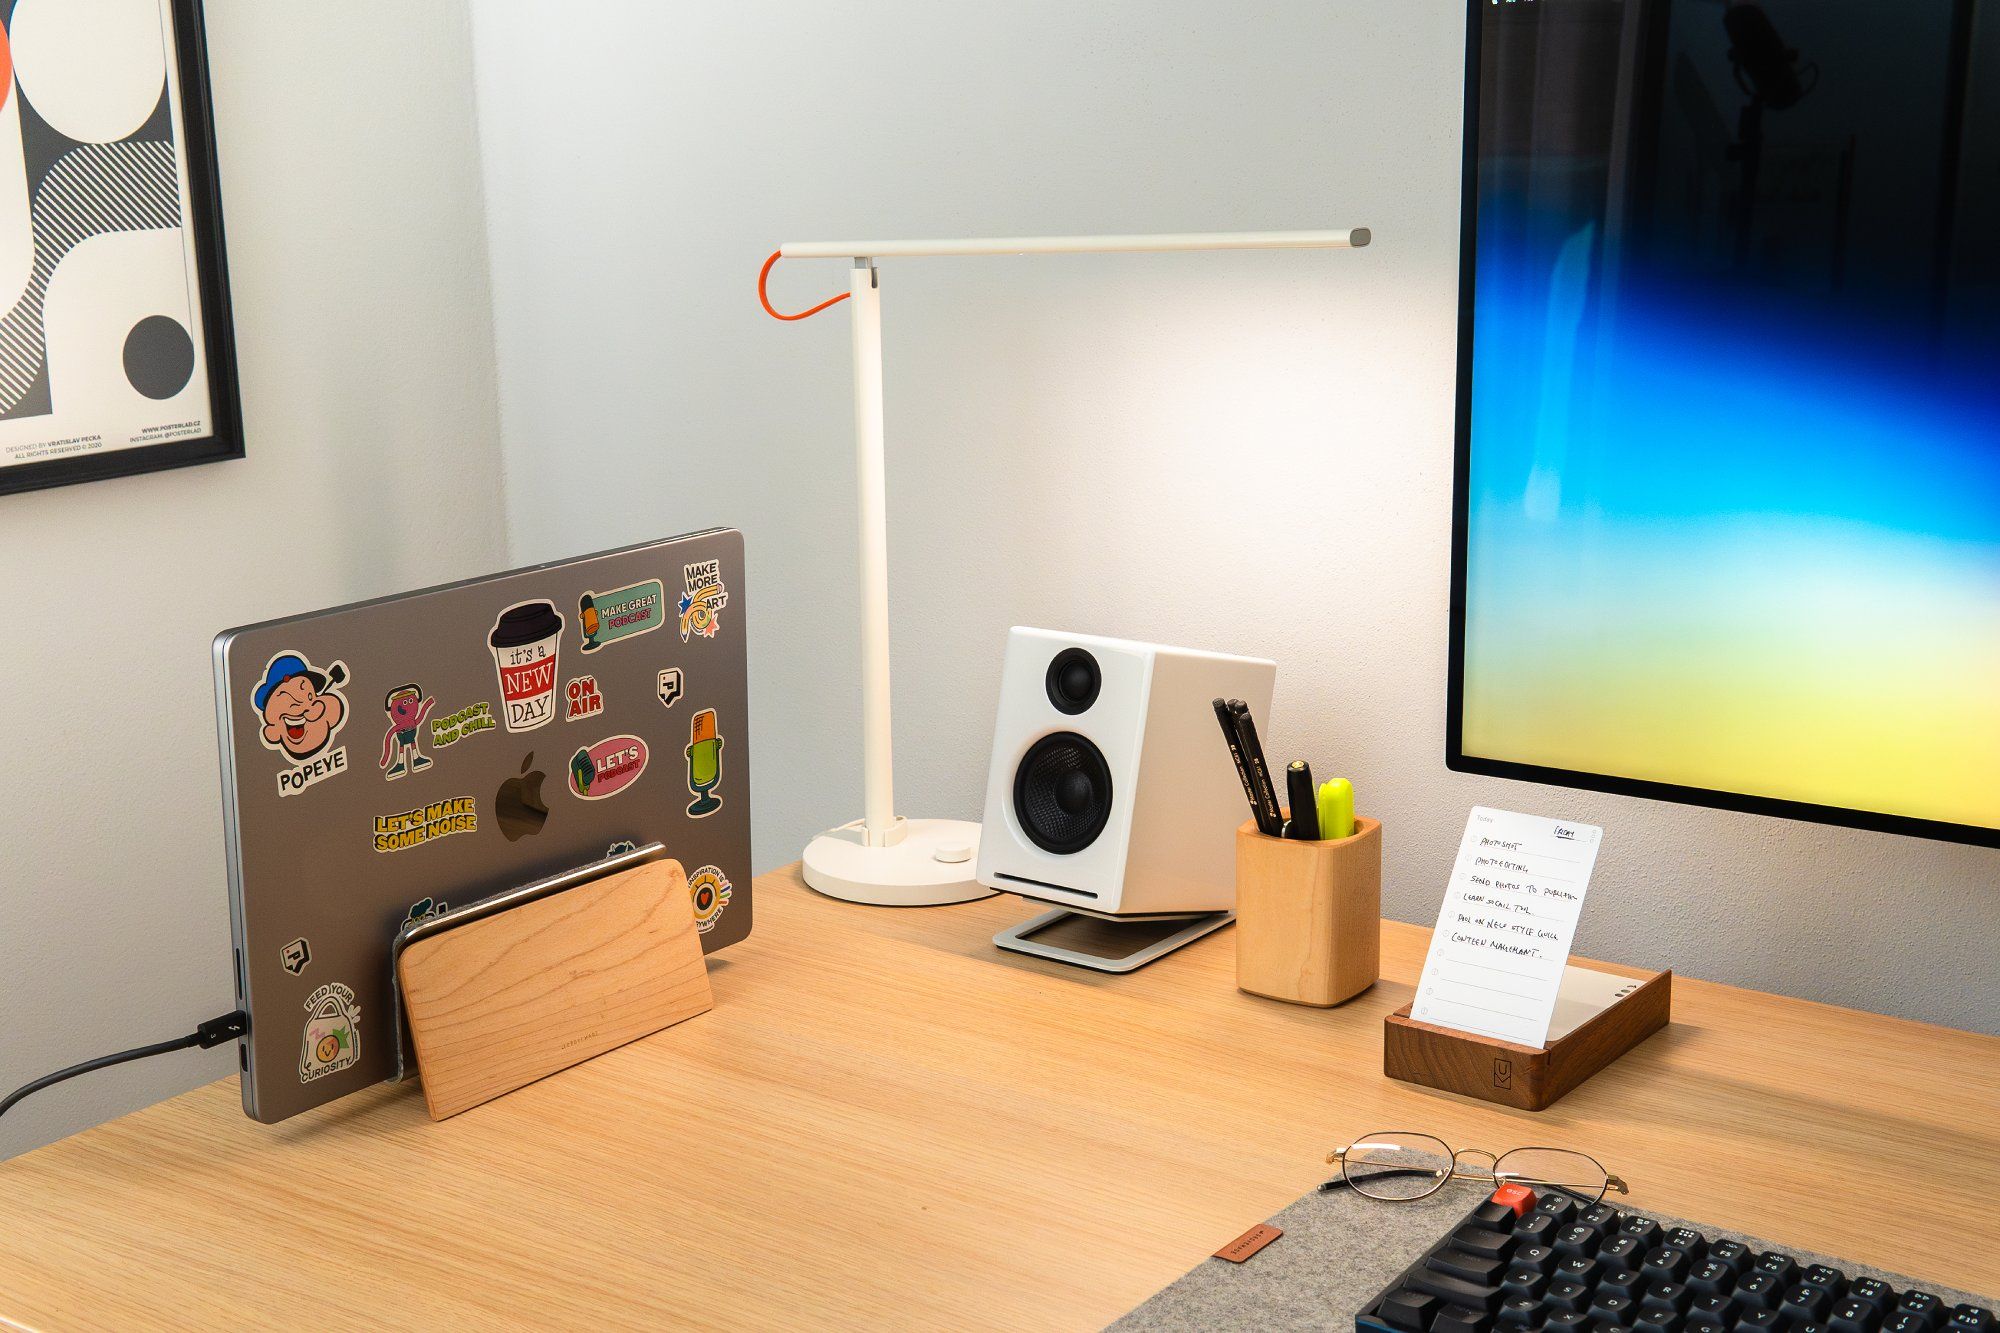 The left corner of the desk setup showcasing an M1 MacBook on a stand, accompanied by the Xiaomi LED desk lamp